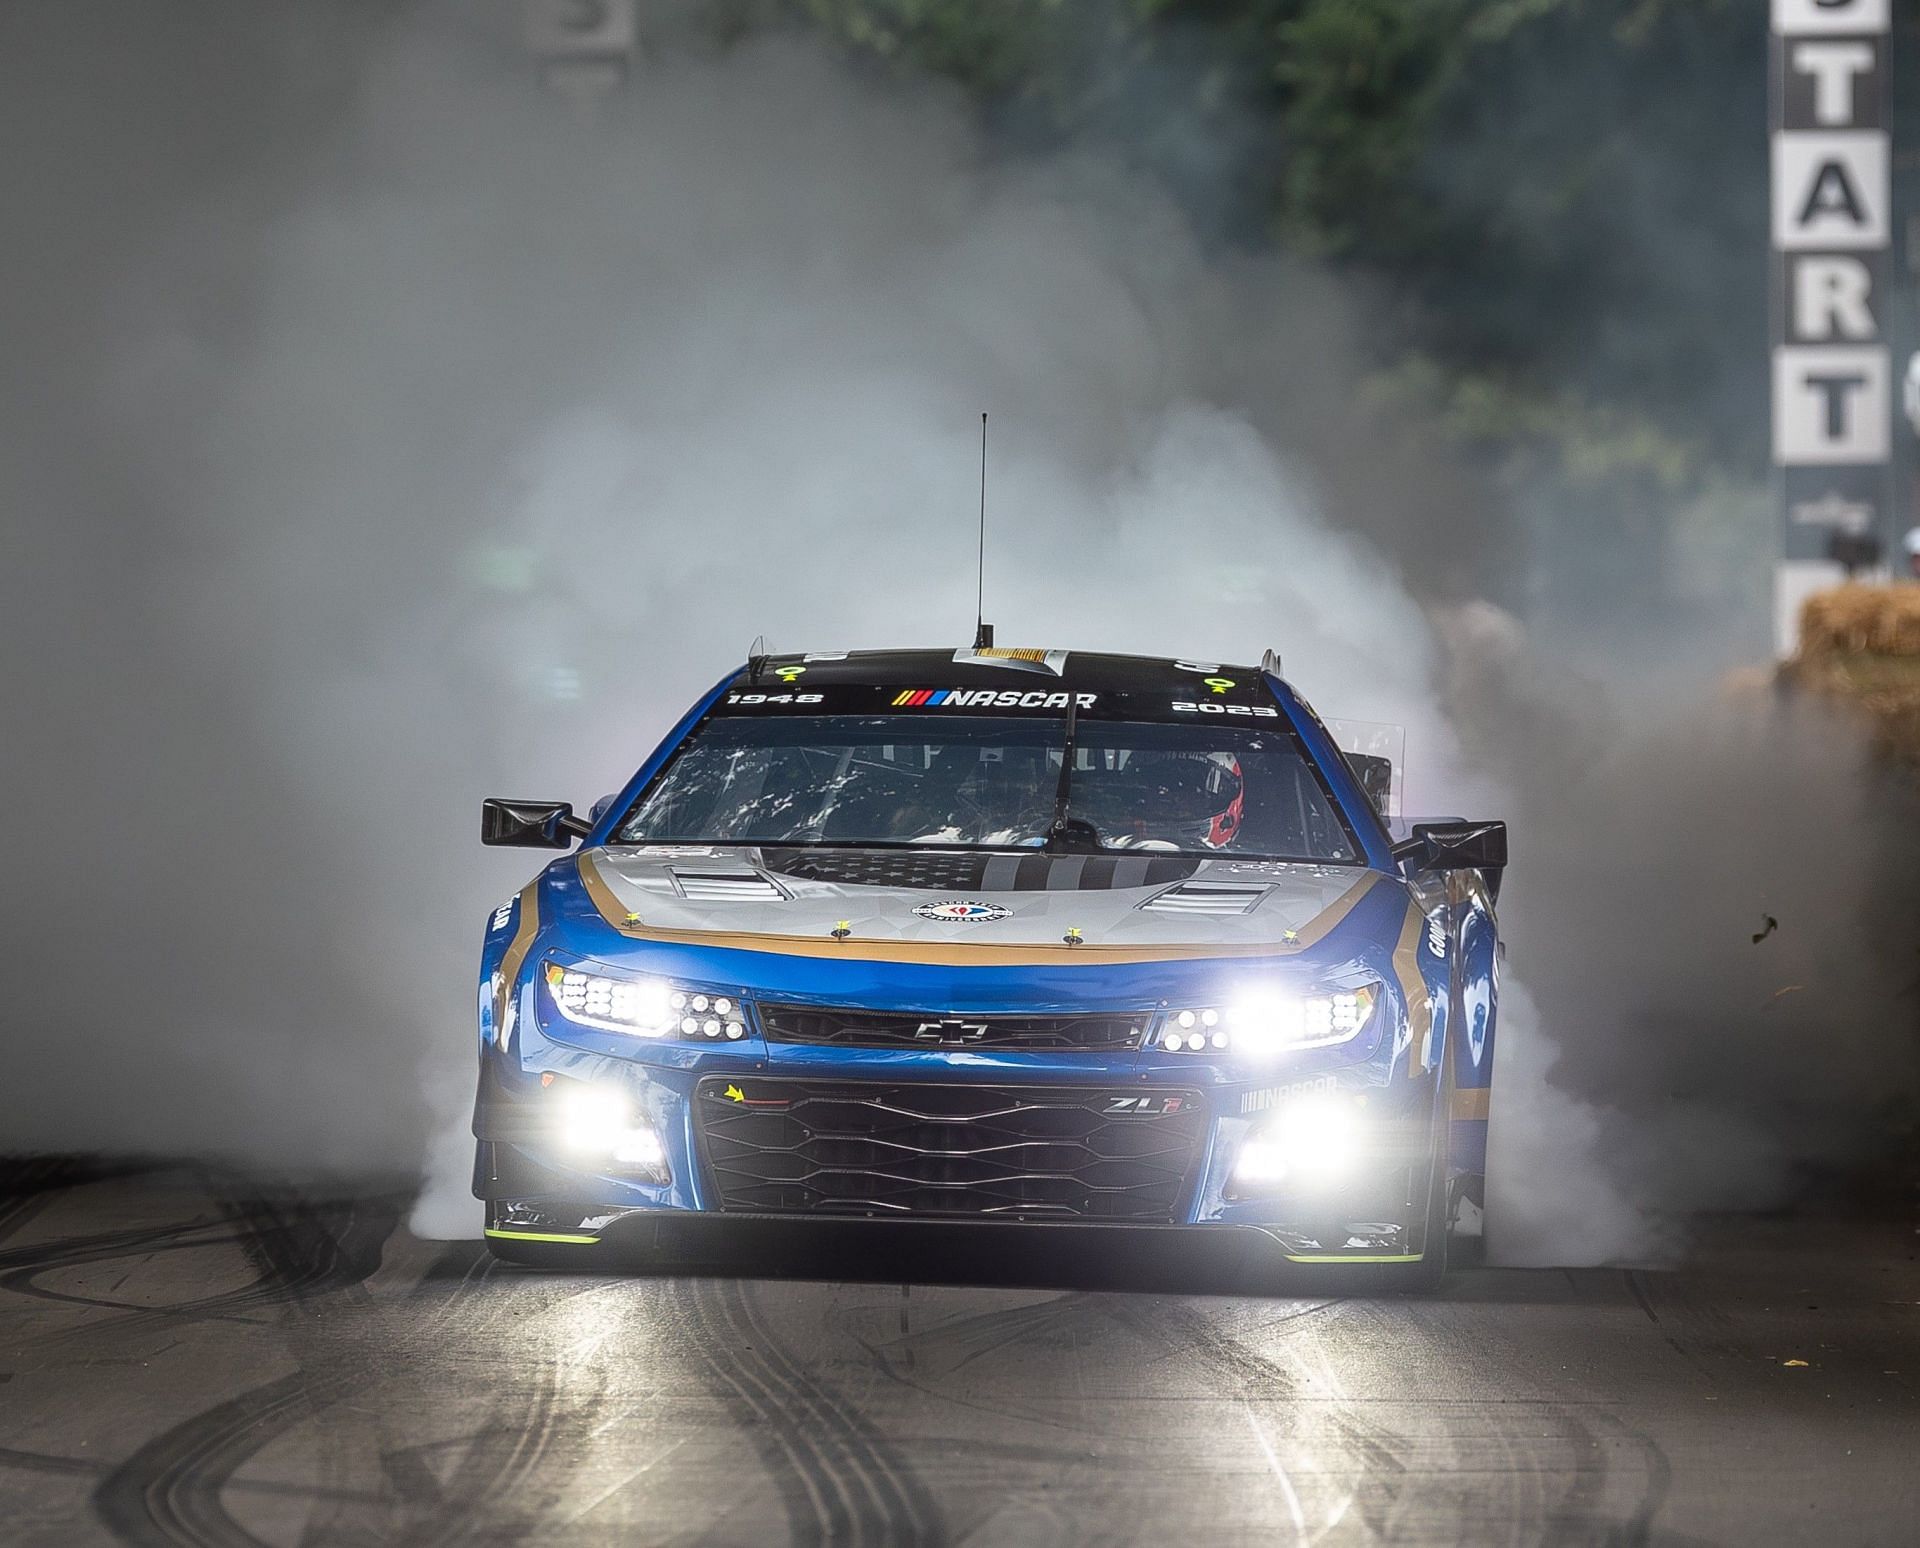 Jenson Button performs a burnout in the NASCAR Garage 56 car in front of the crowd at the 2023 Goodwood Festival of Speed in Goodwood, England. Picture Credits: Goodwood Festival of Speed YouTube channel